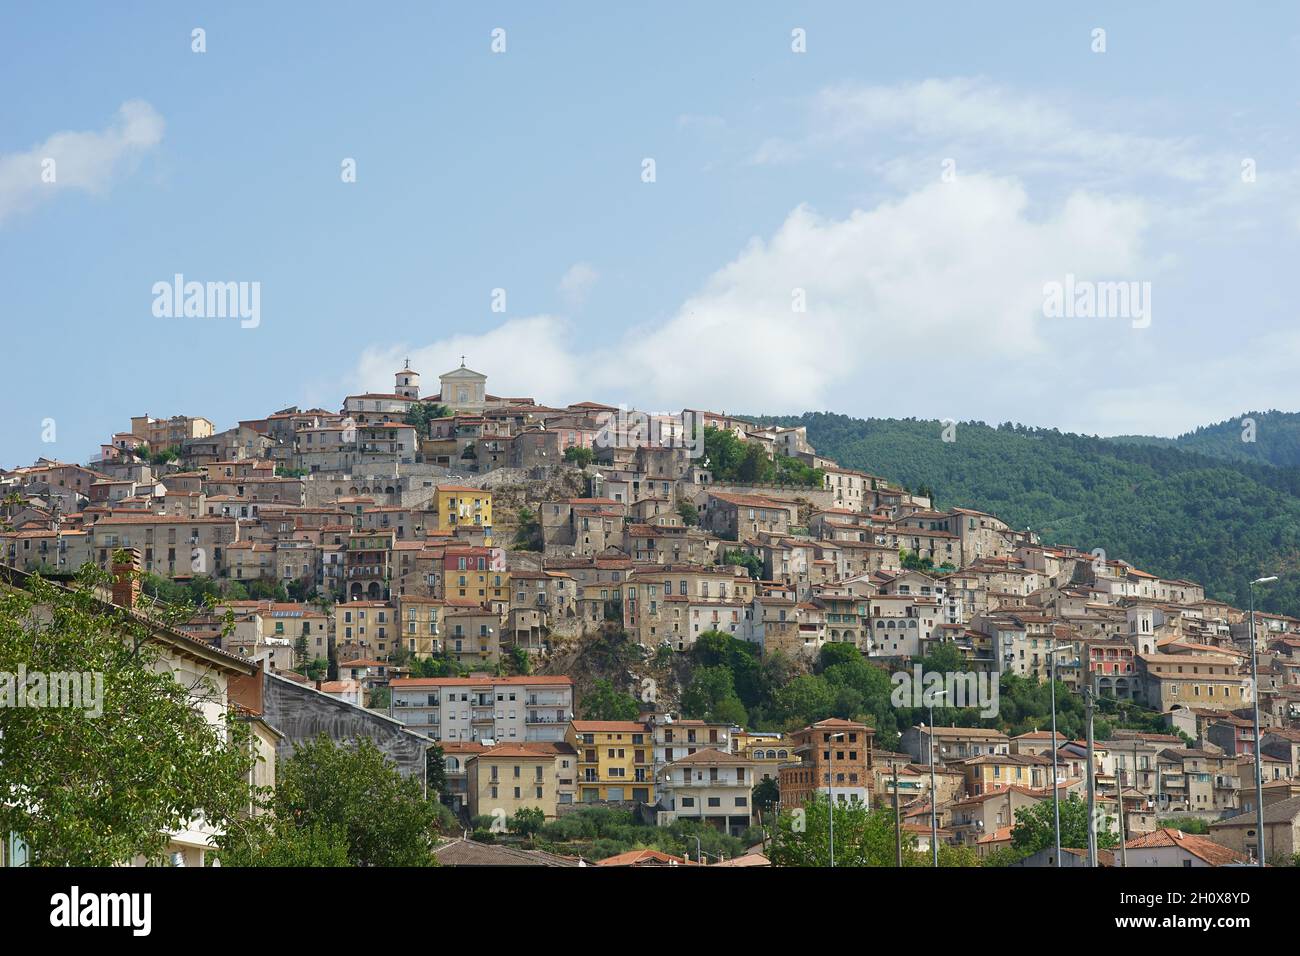 City of Padula in the province of Salerno in Campania, Italy Stock Photo